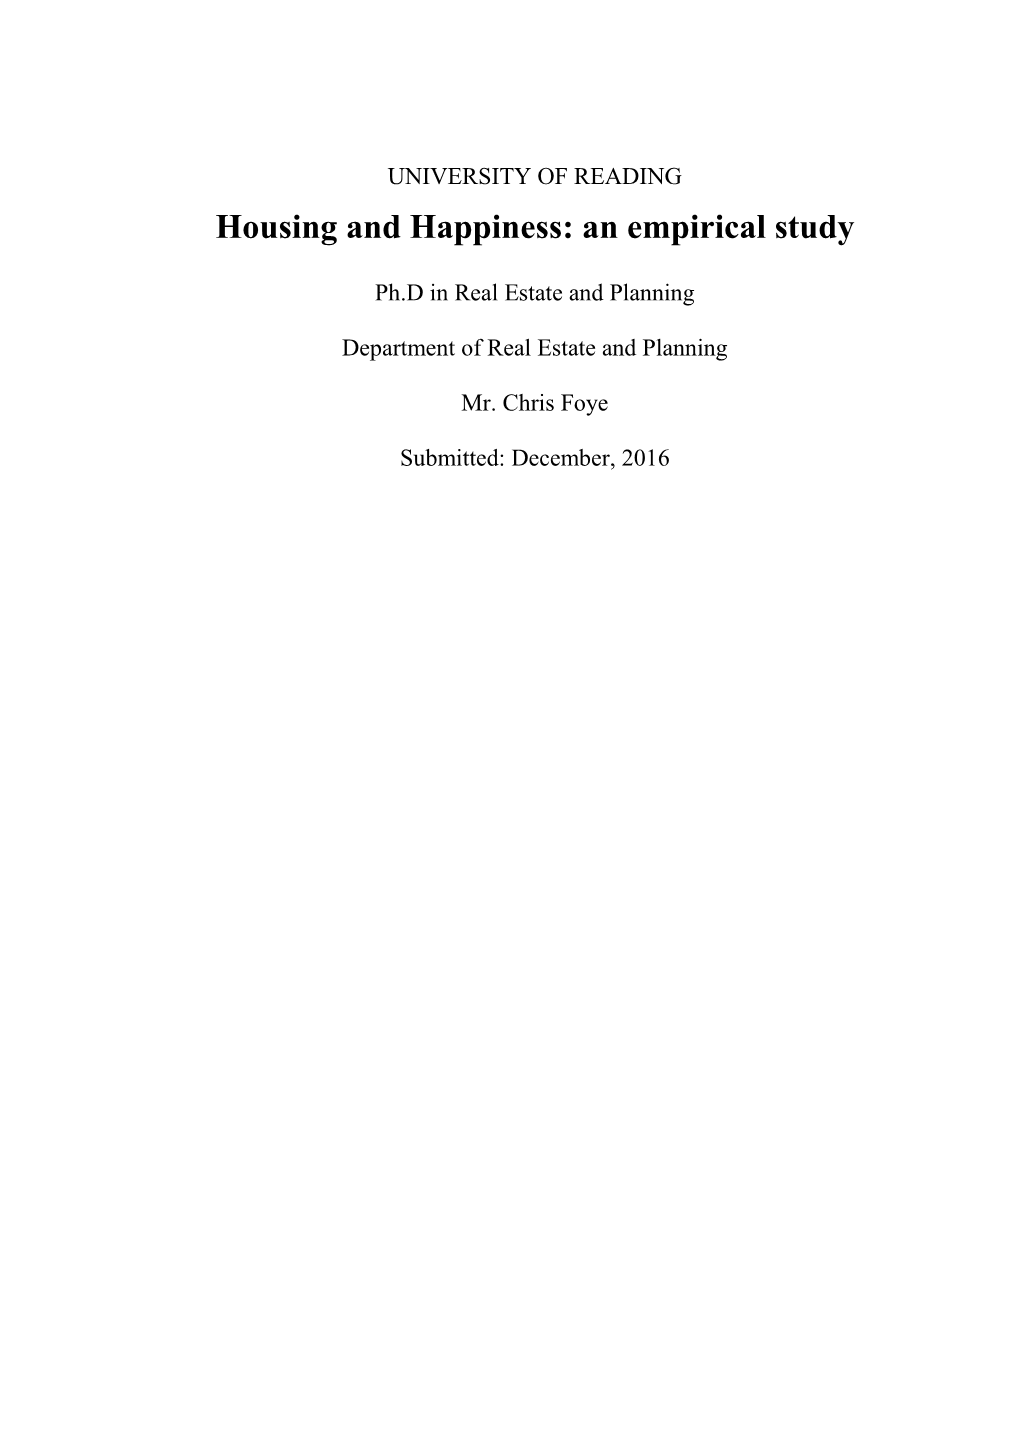 Housing and Happiness: an Empirical Study